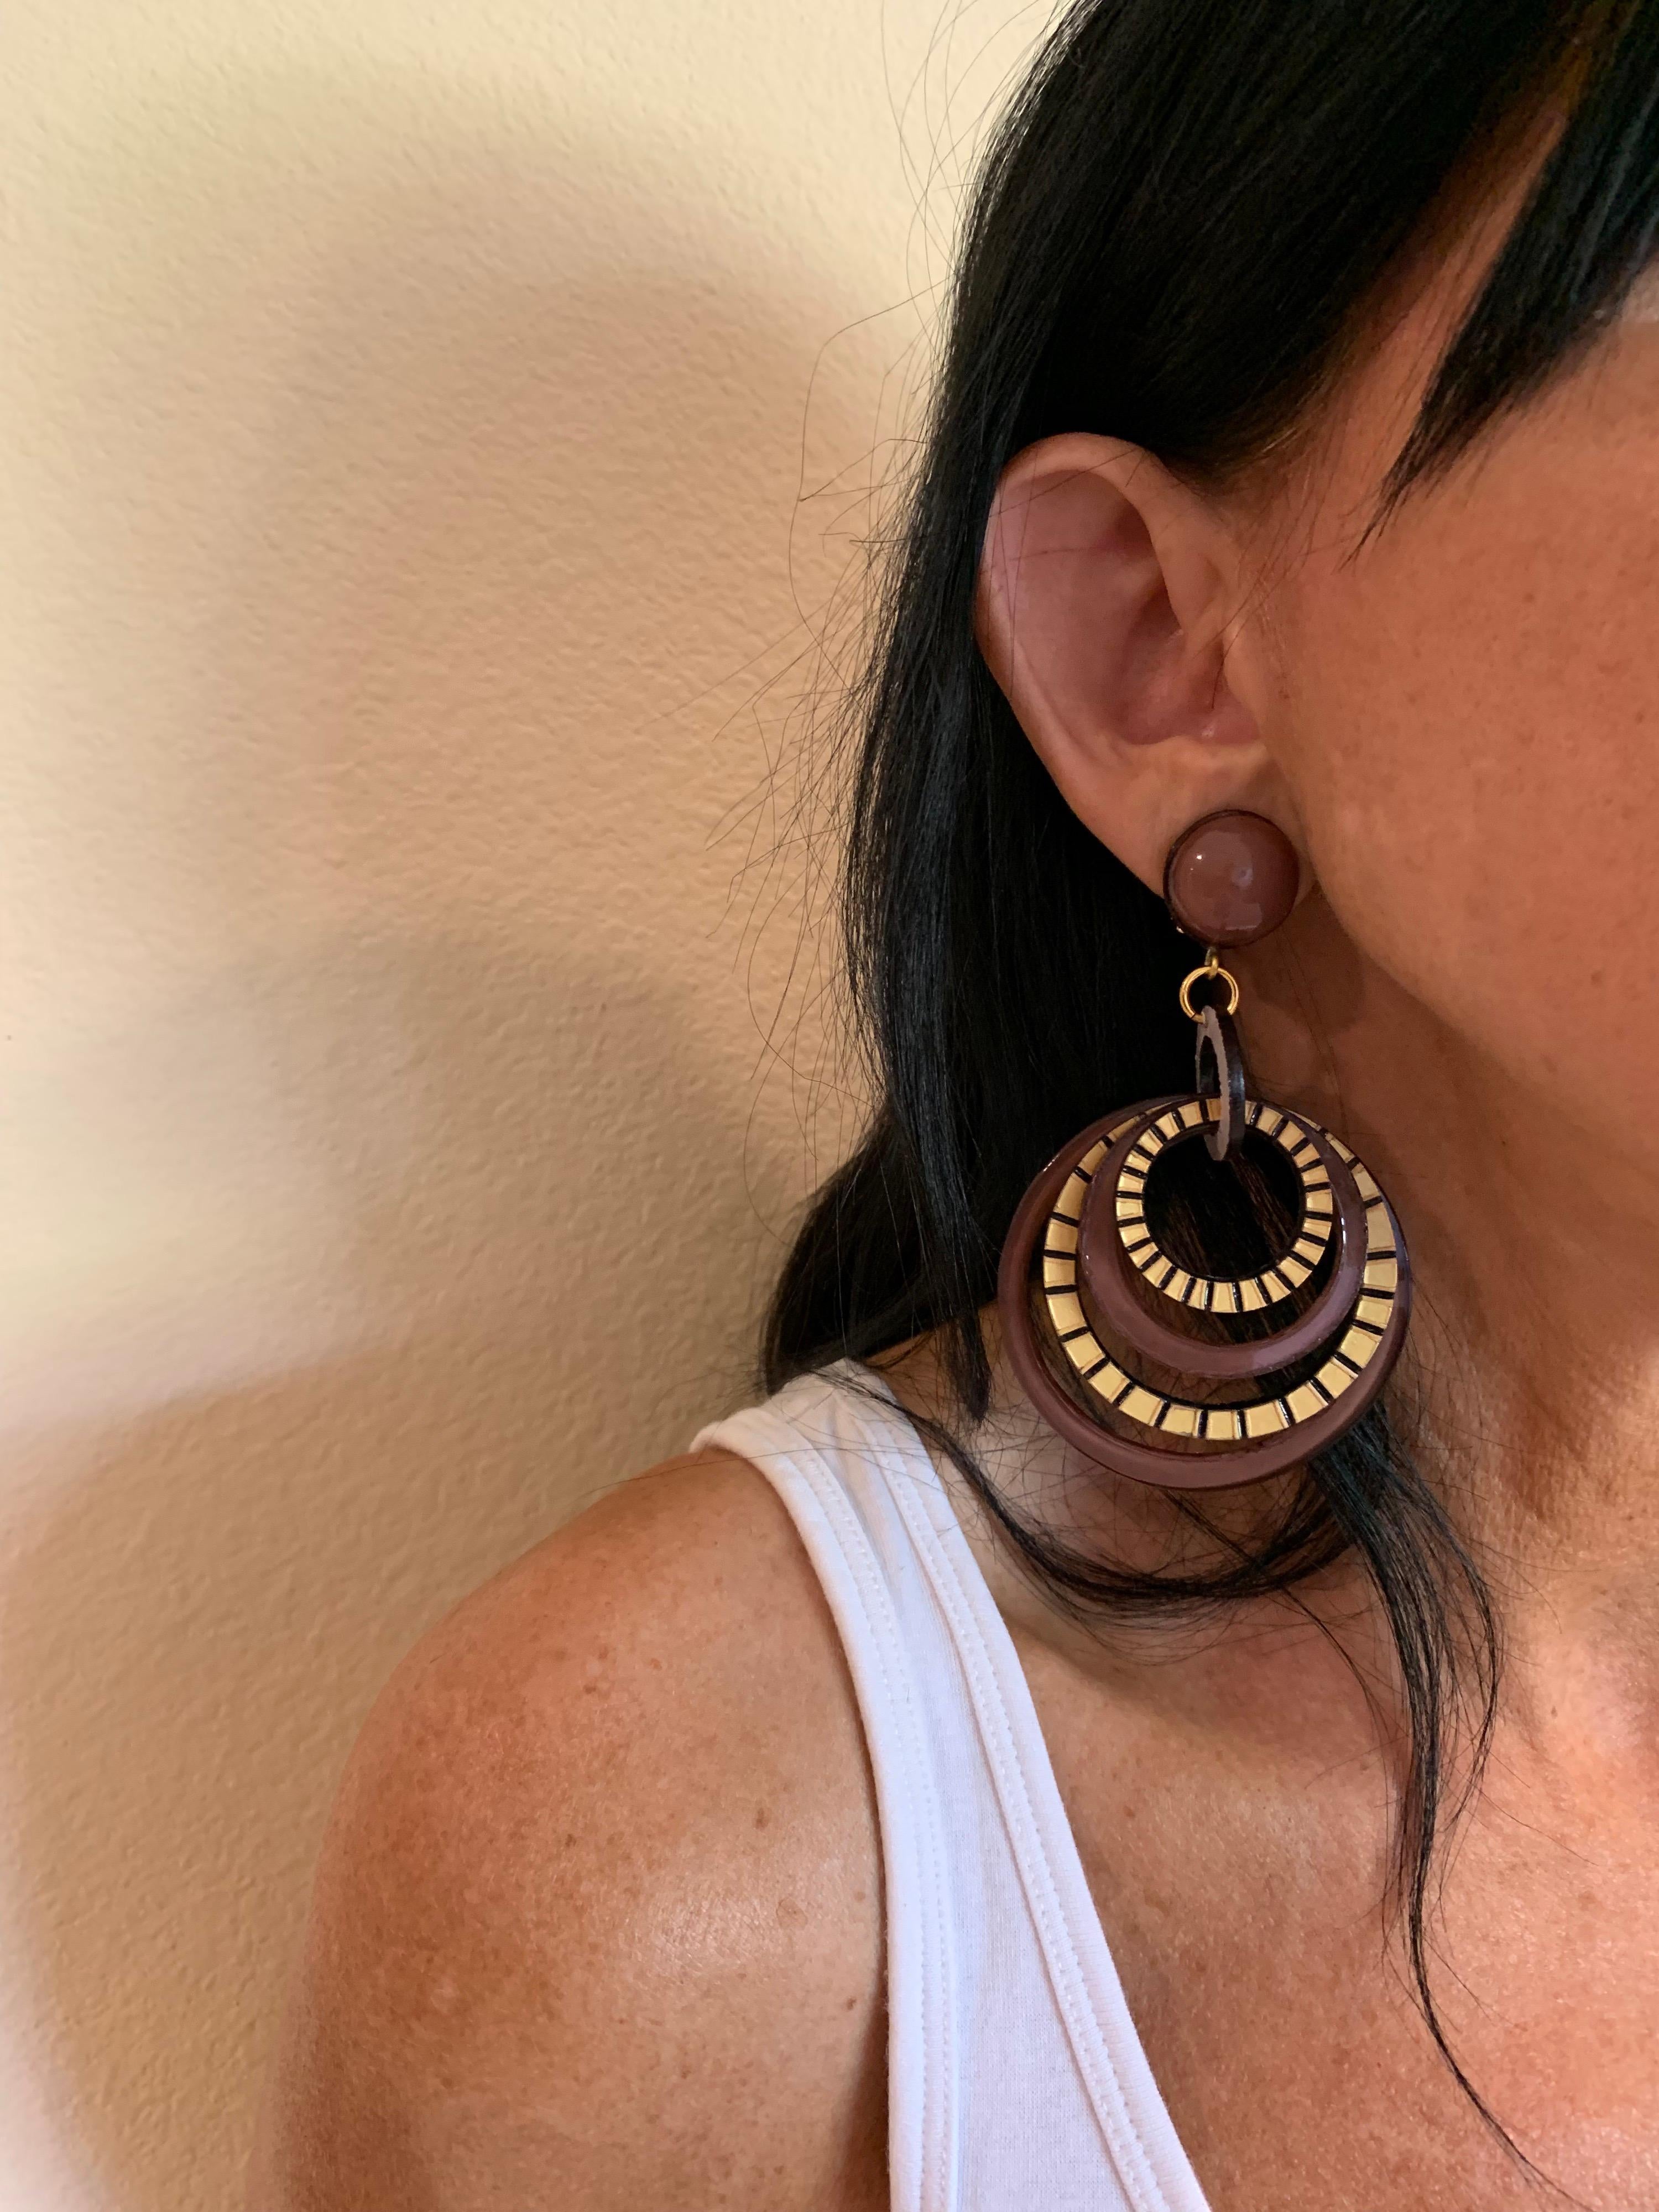 Light and easy to wear, these handmade artisanal hoop clip-on earrings were made in Paris by Cilea. The earrings are comprised of black, brown and gold enameline (resin and enamel composite) and depict three-dimensional pop art circles. Throughout